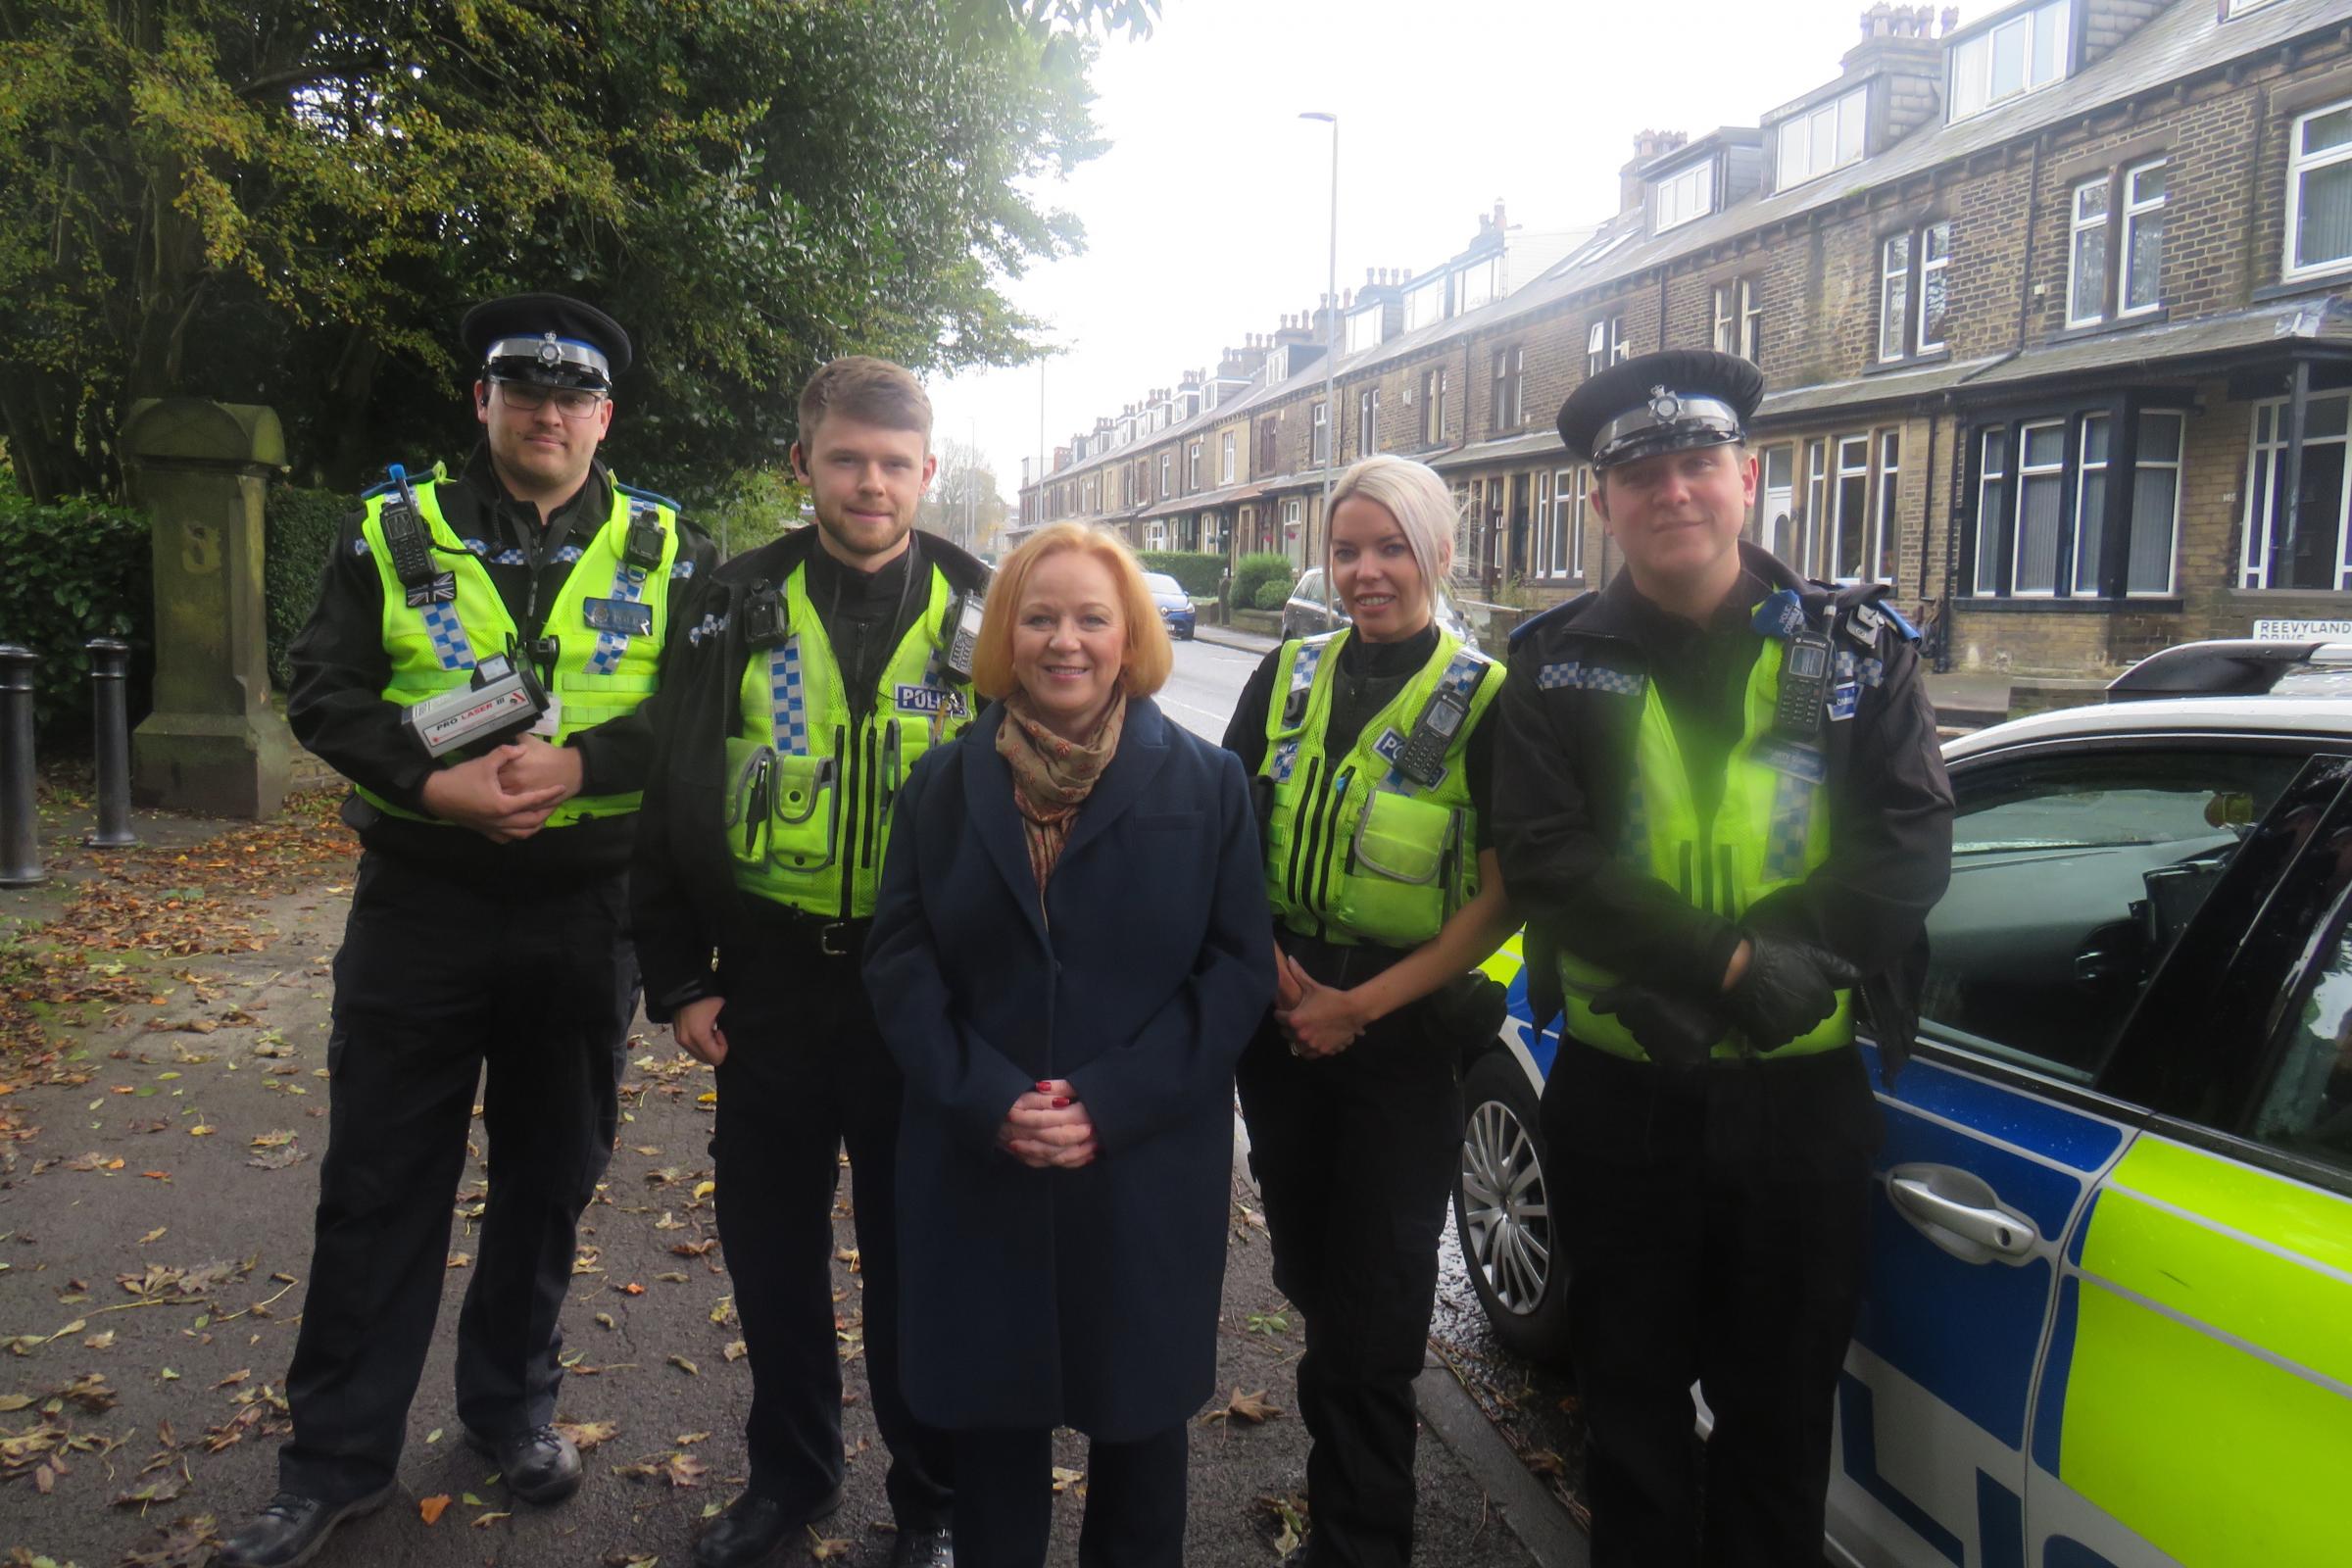 MP Judith Cummins on the beat with Bradford South police